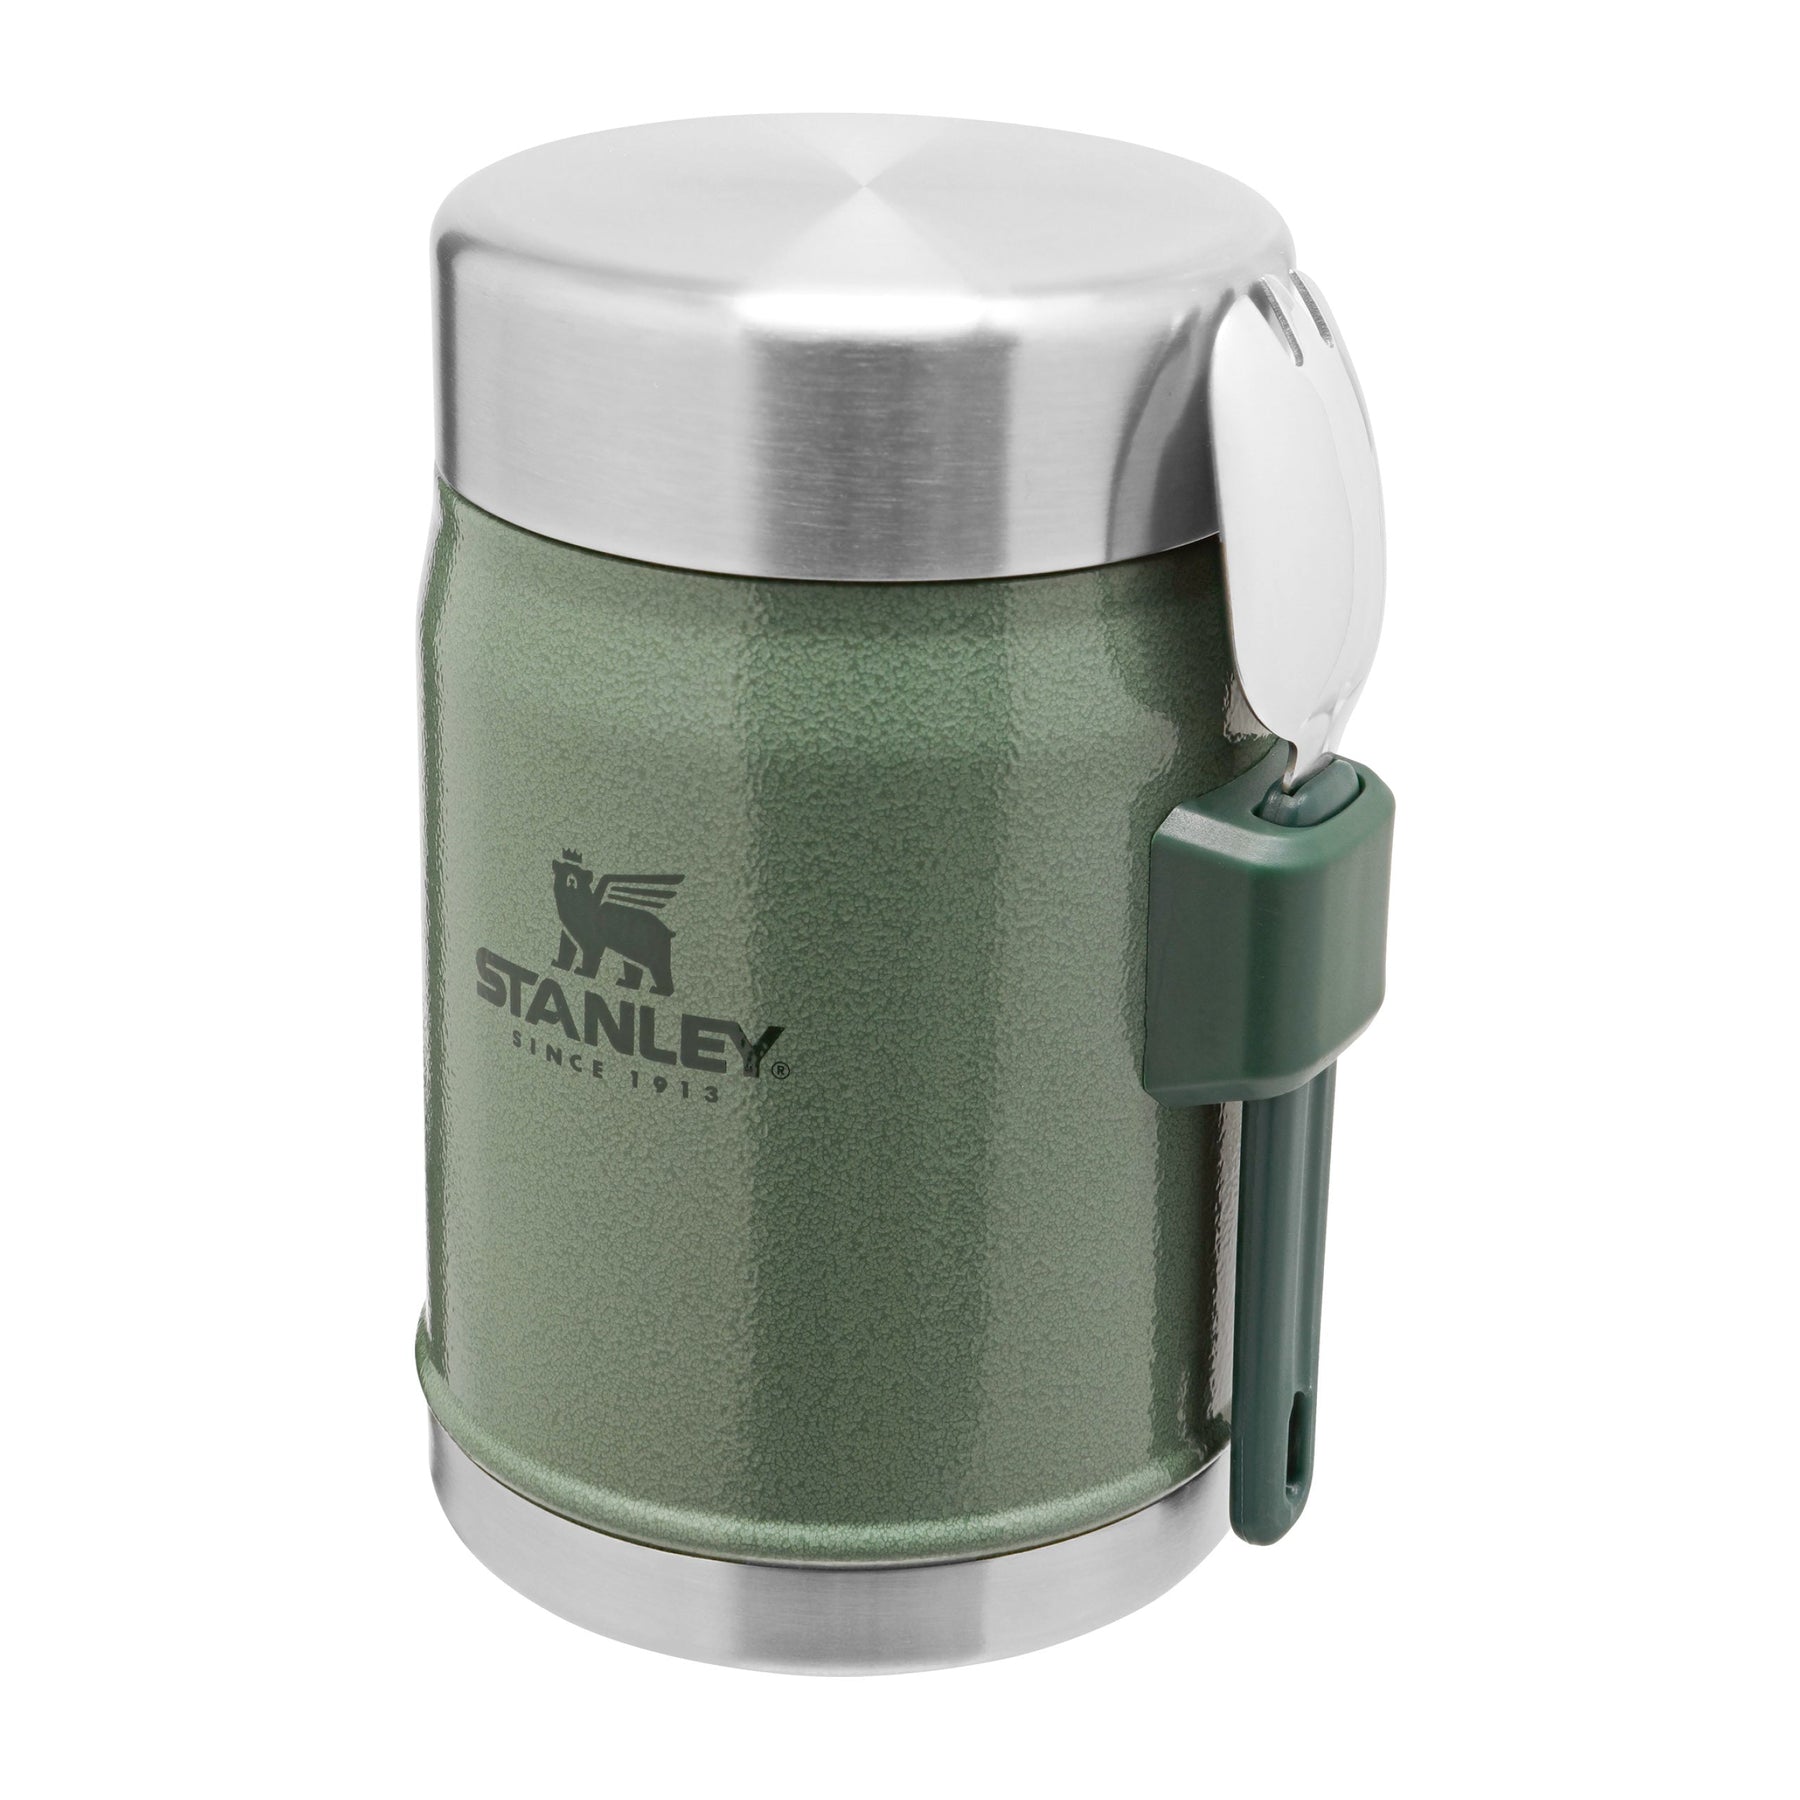 Stanley 1913 14 Oz Insulated Food Jar with Spork Hammertone Green  10-11353-001 from Stanley 1913 - Acme Tools